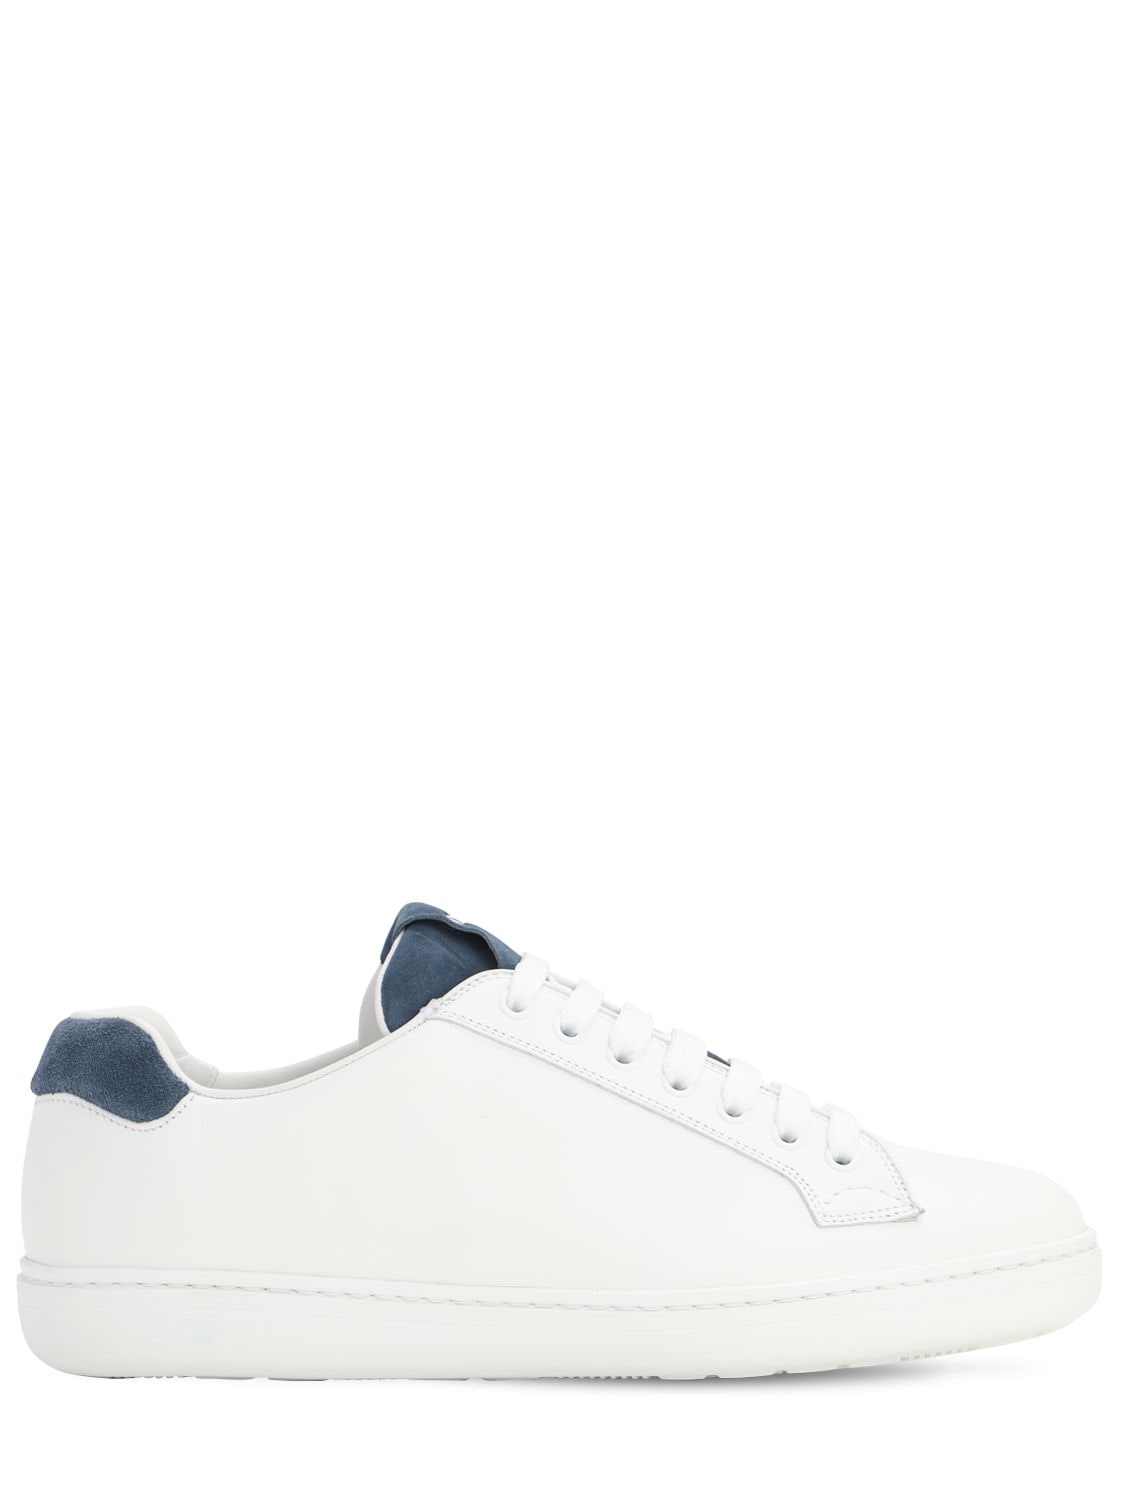 CHURCH'S BOLAND PLUS 2 LEATHER SNEAKERS,71IR60001-RJBAVE01